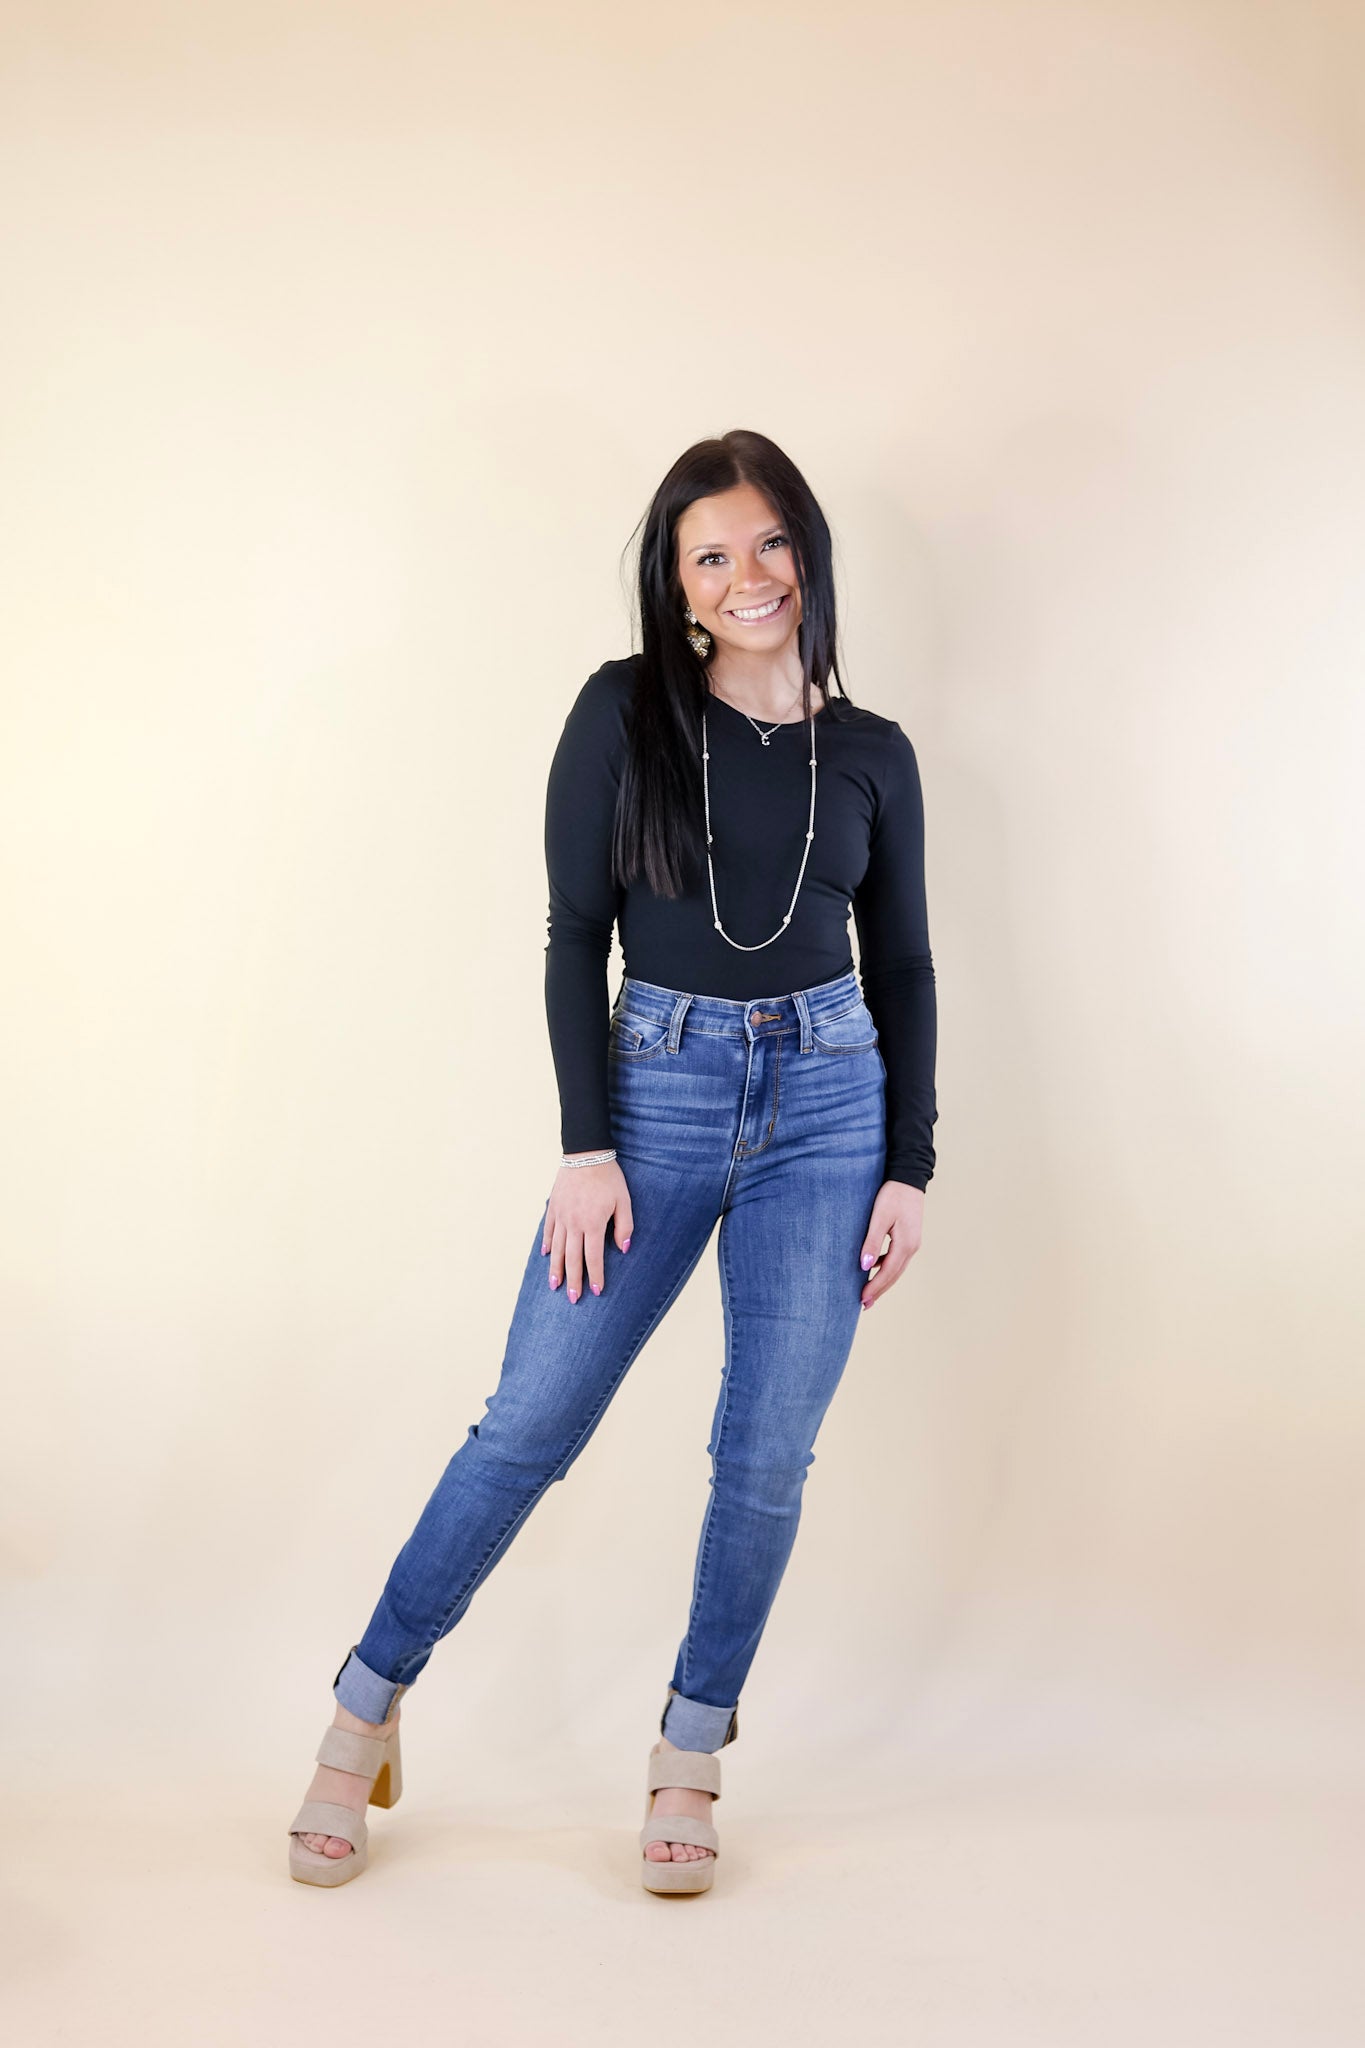 Judy Blue | Signature Stride Cuffed Hem Skinny Jeans in Medium Wash - Giddy Up Glamour Boutique